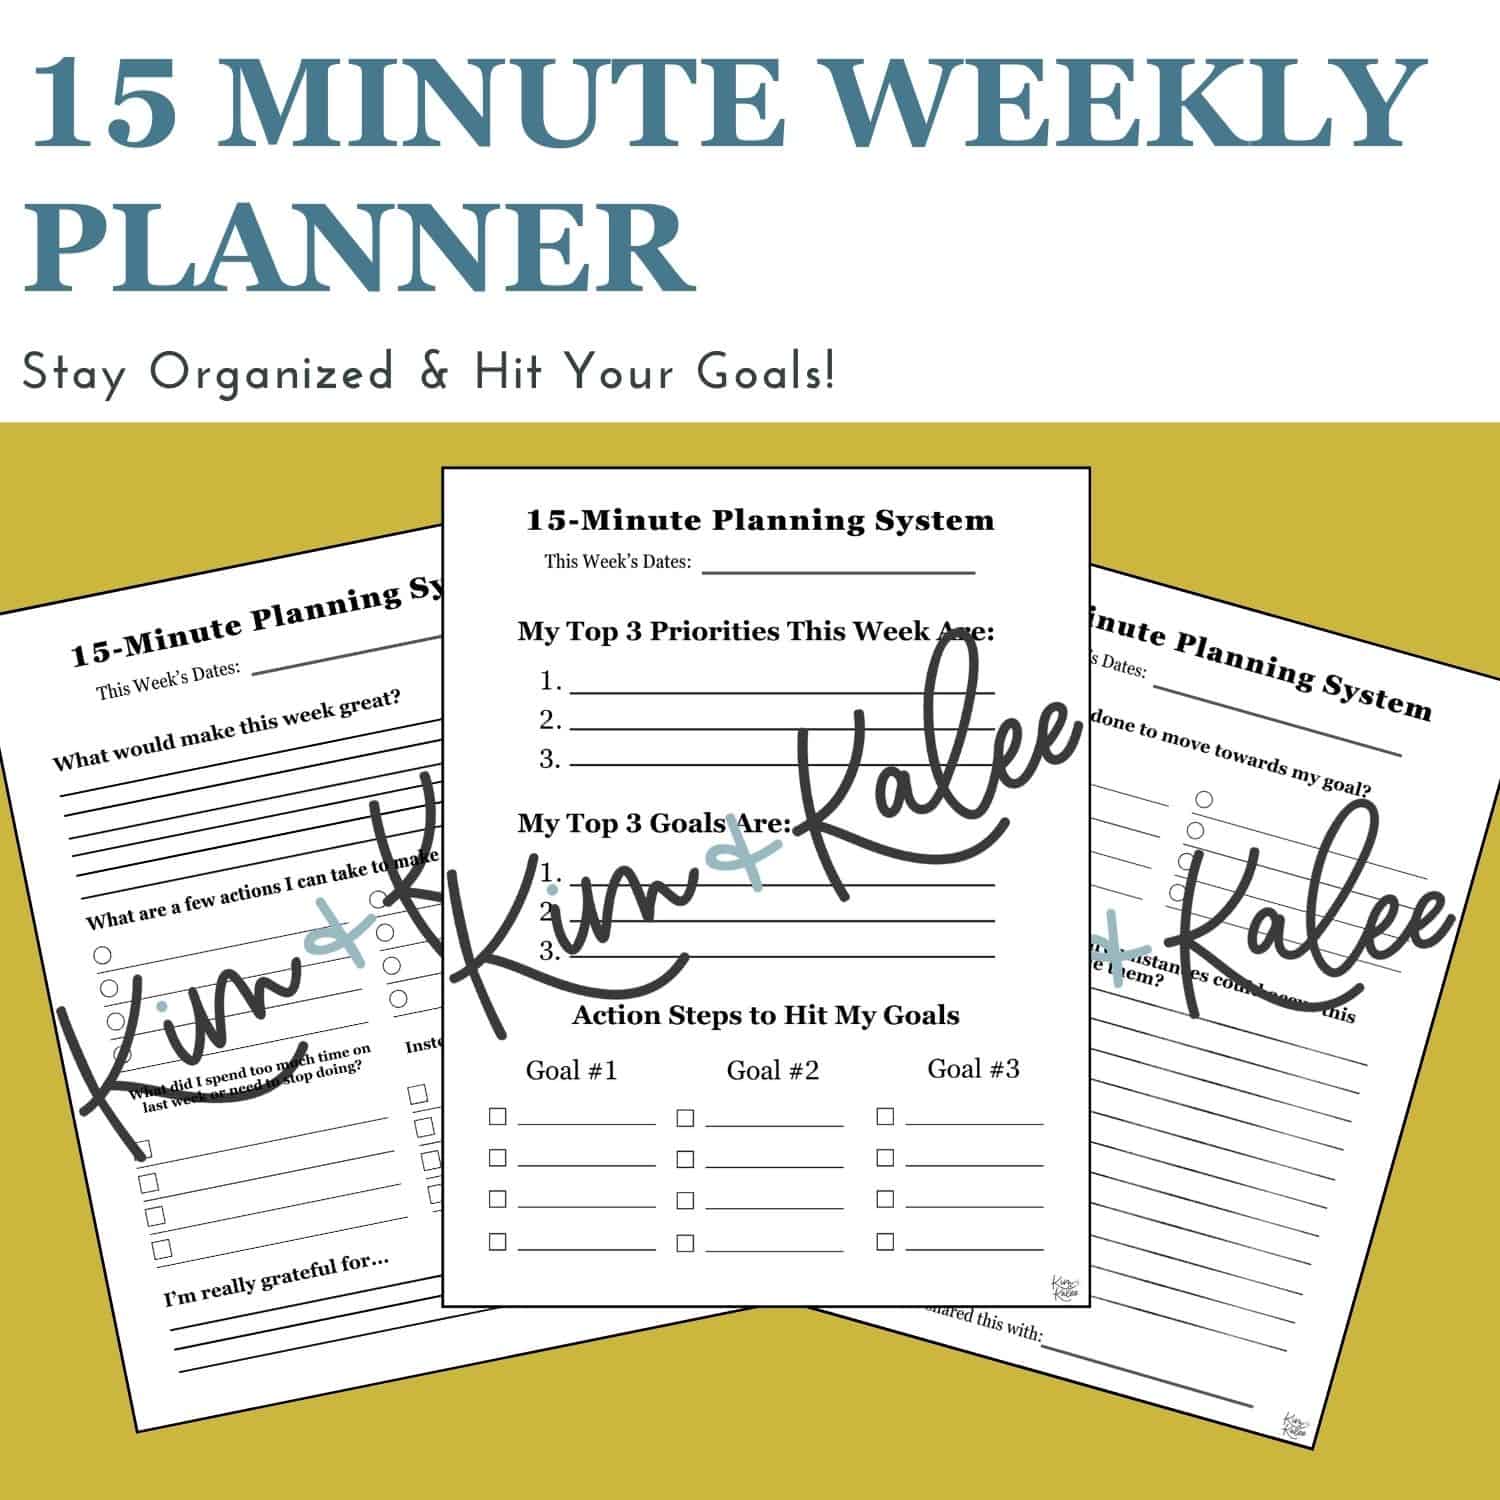 15 minute weekly planner product promo image